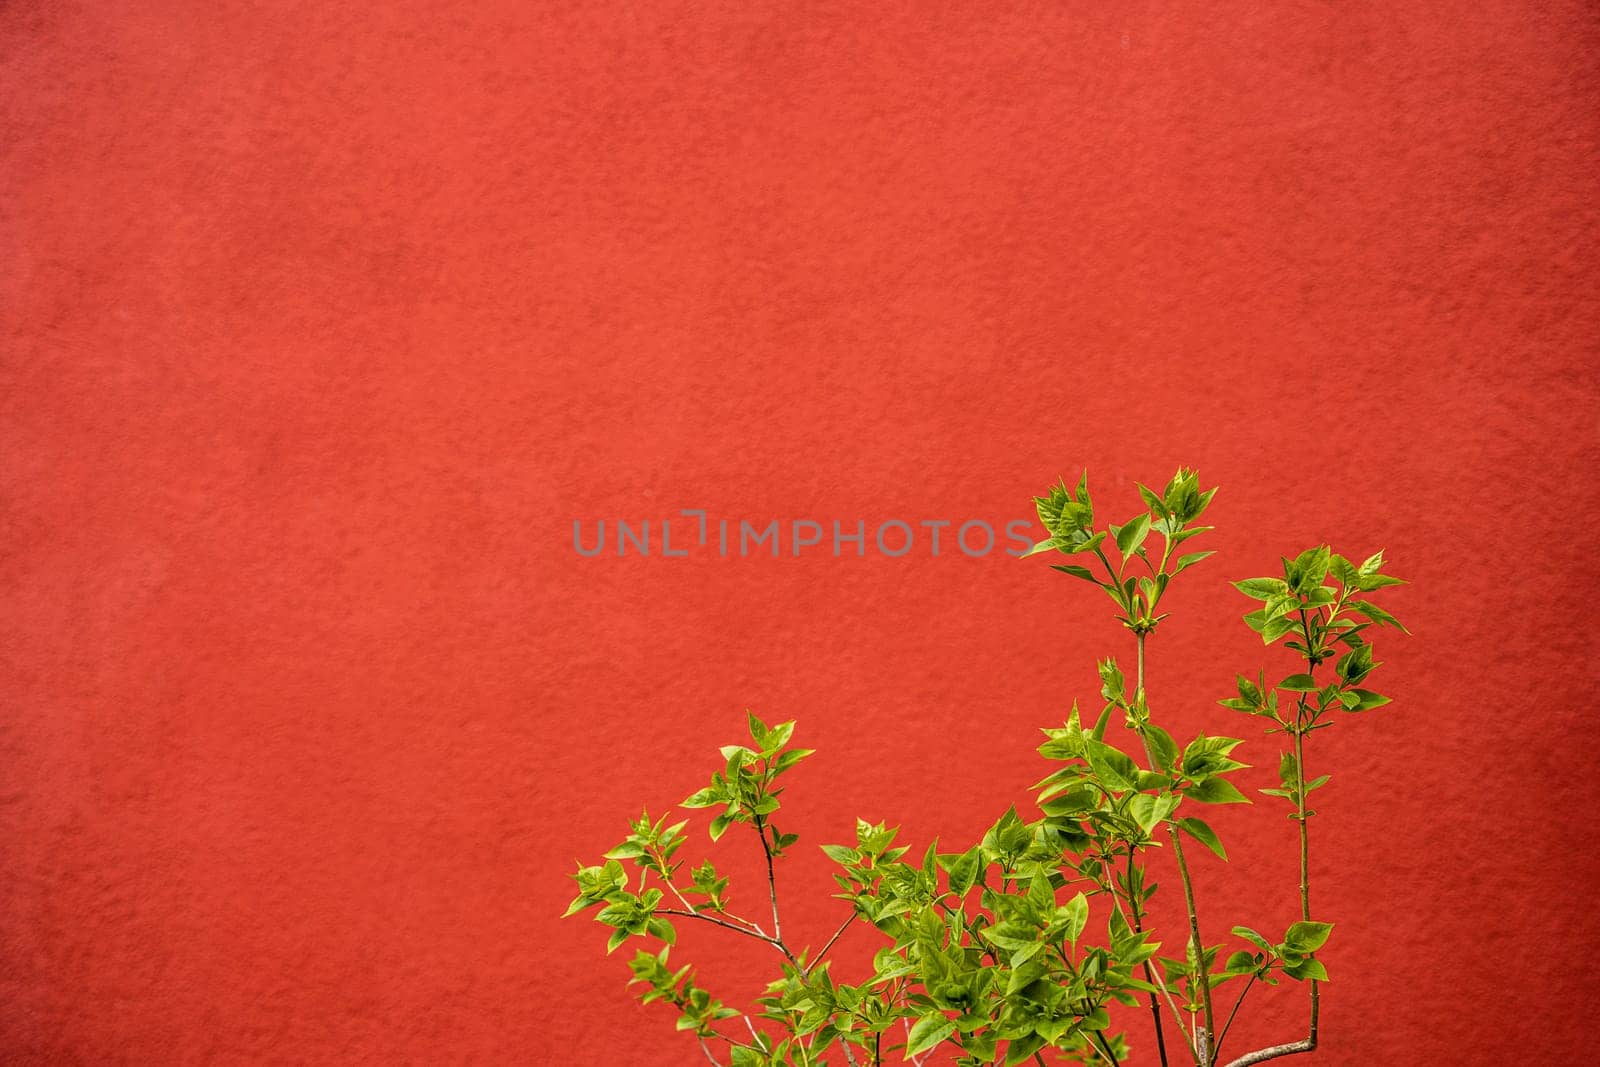 a green tree branch on a red-orange textured background. a symbol of life. greenery